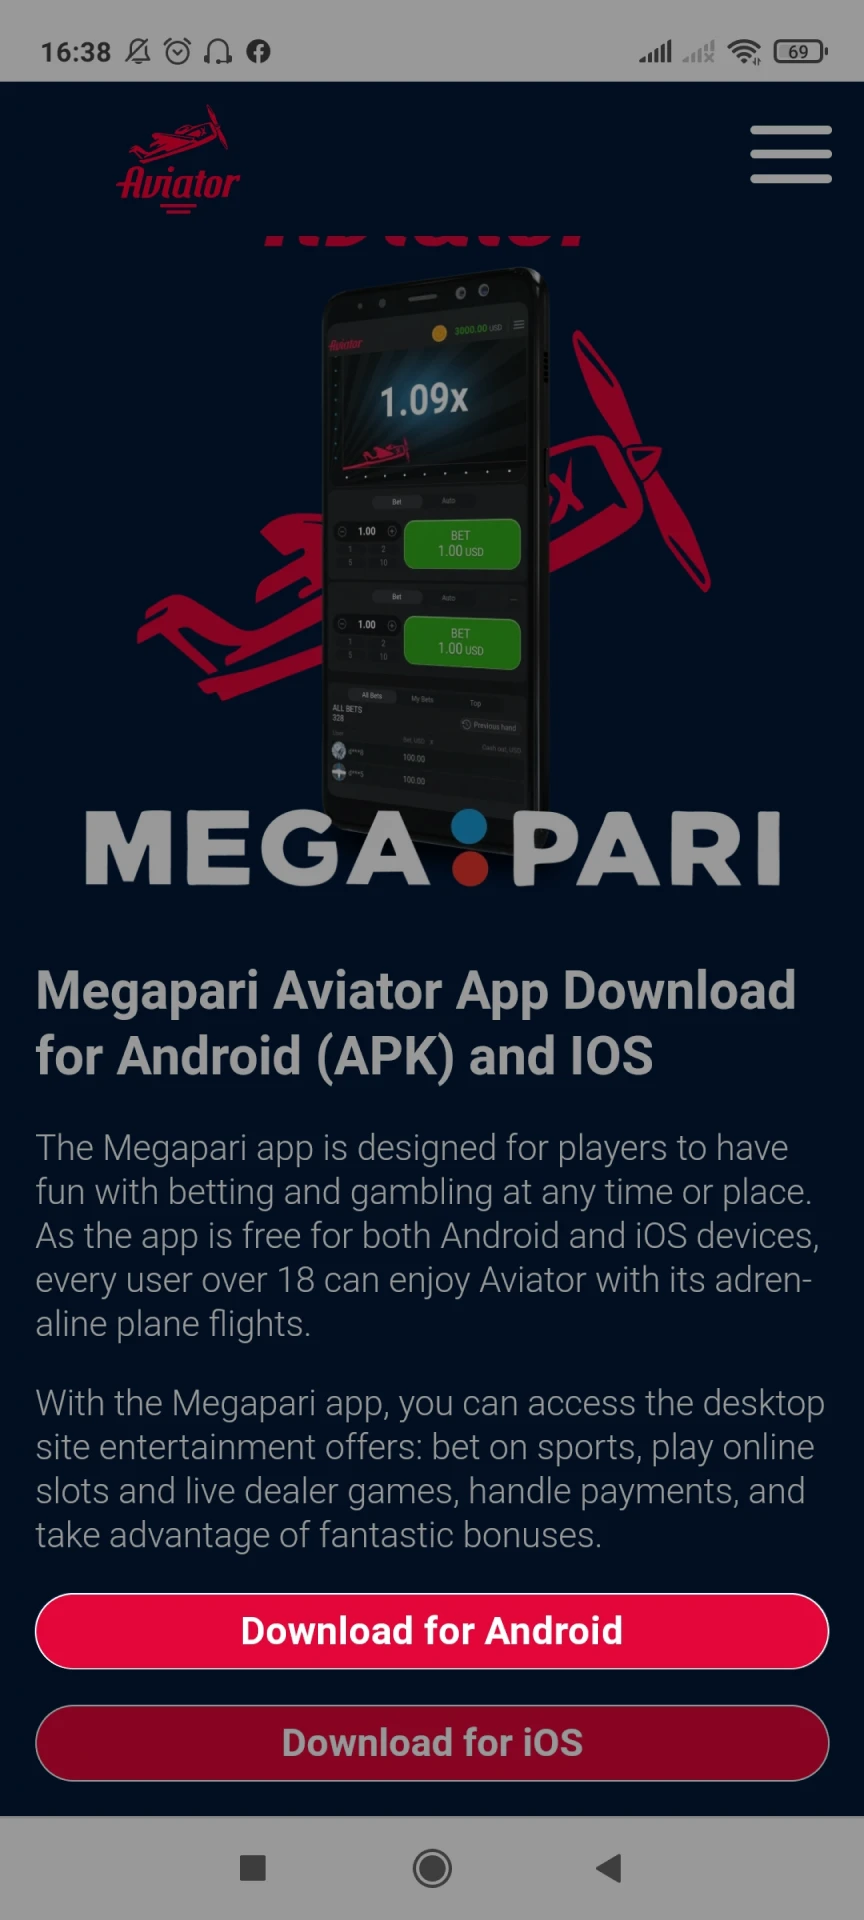 Go to the Megapari homepage to download the app for Android.